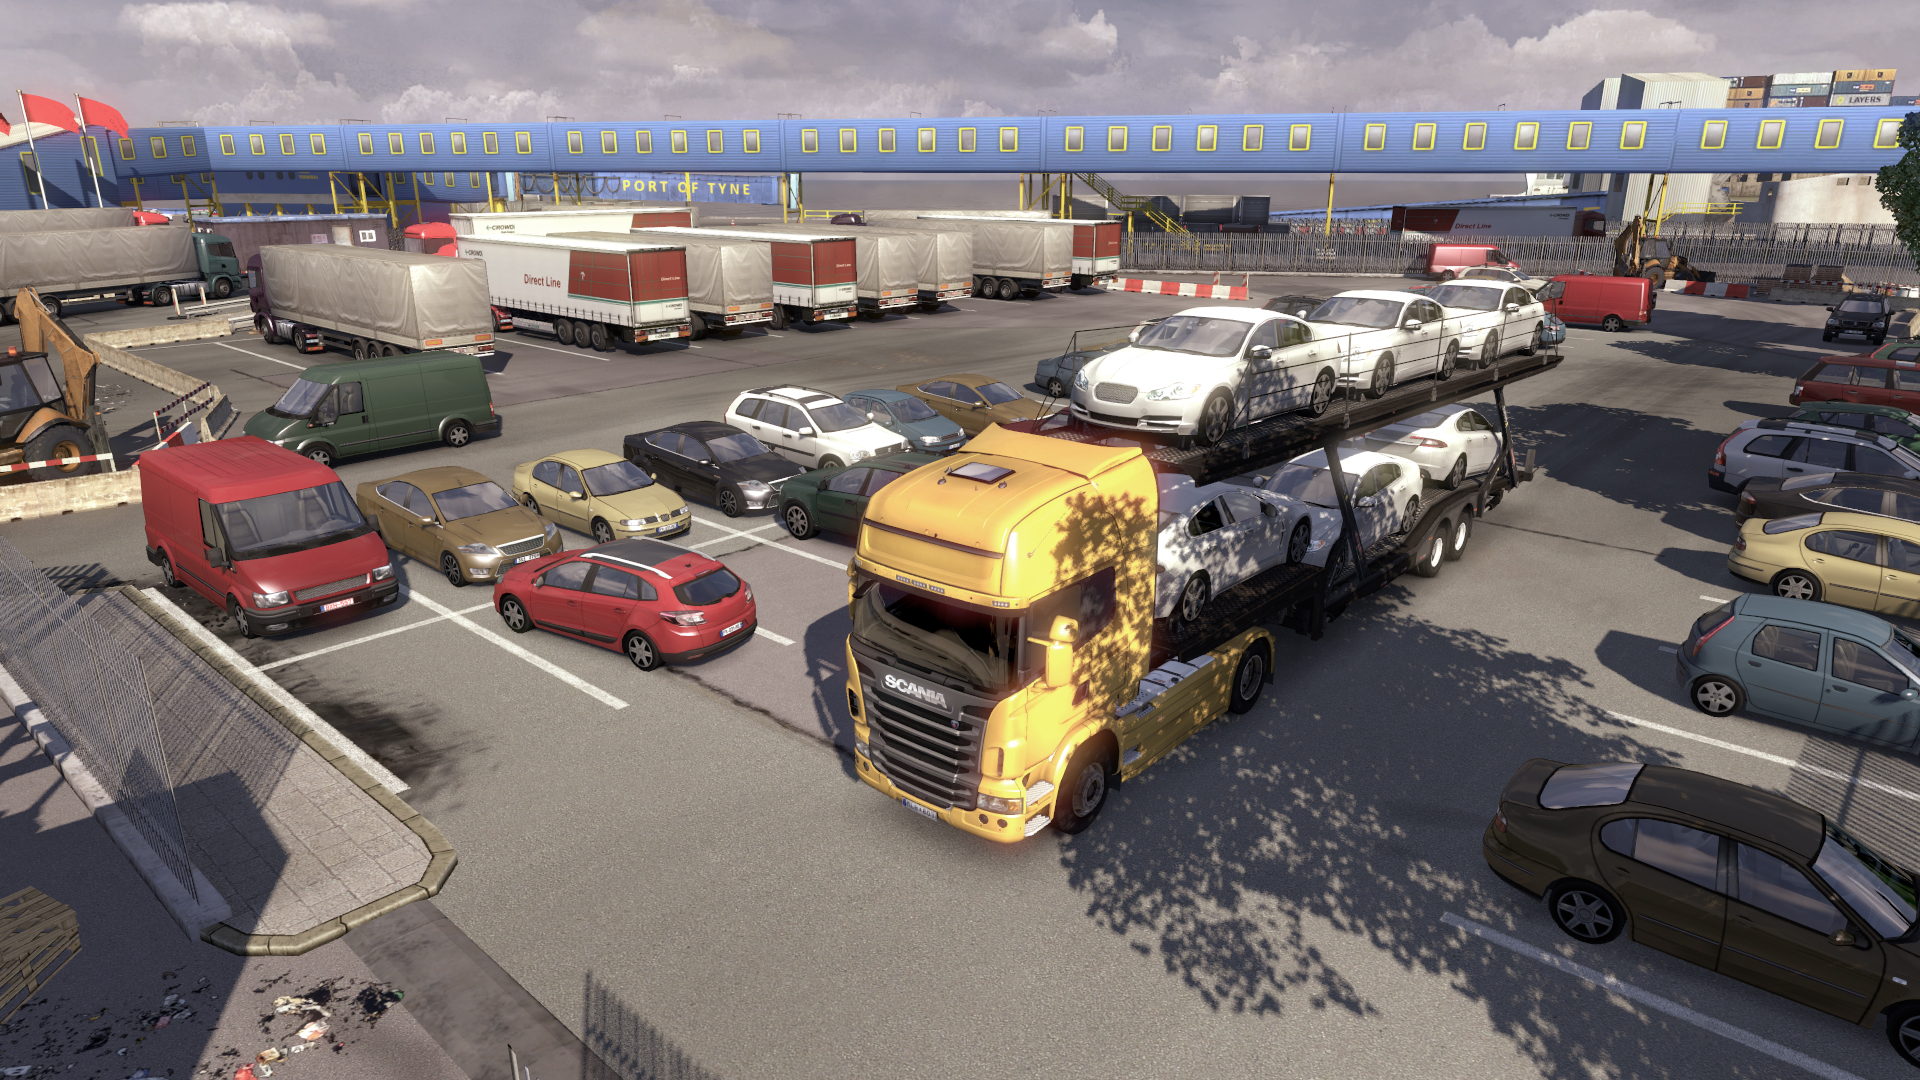 scania truck driving simulator android download